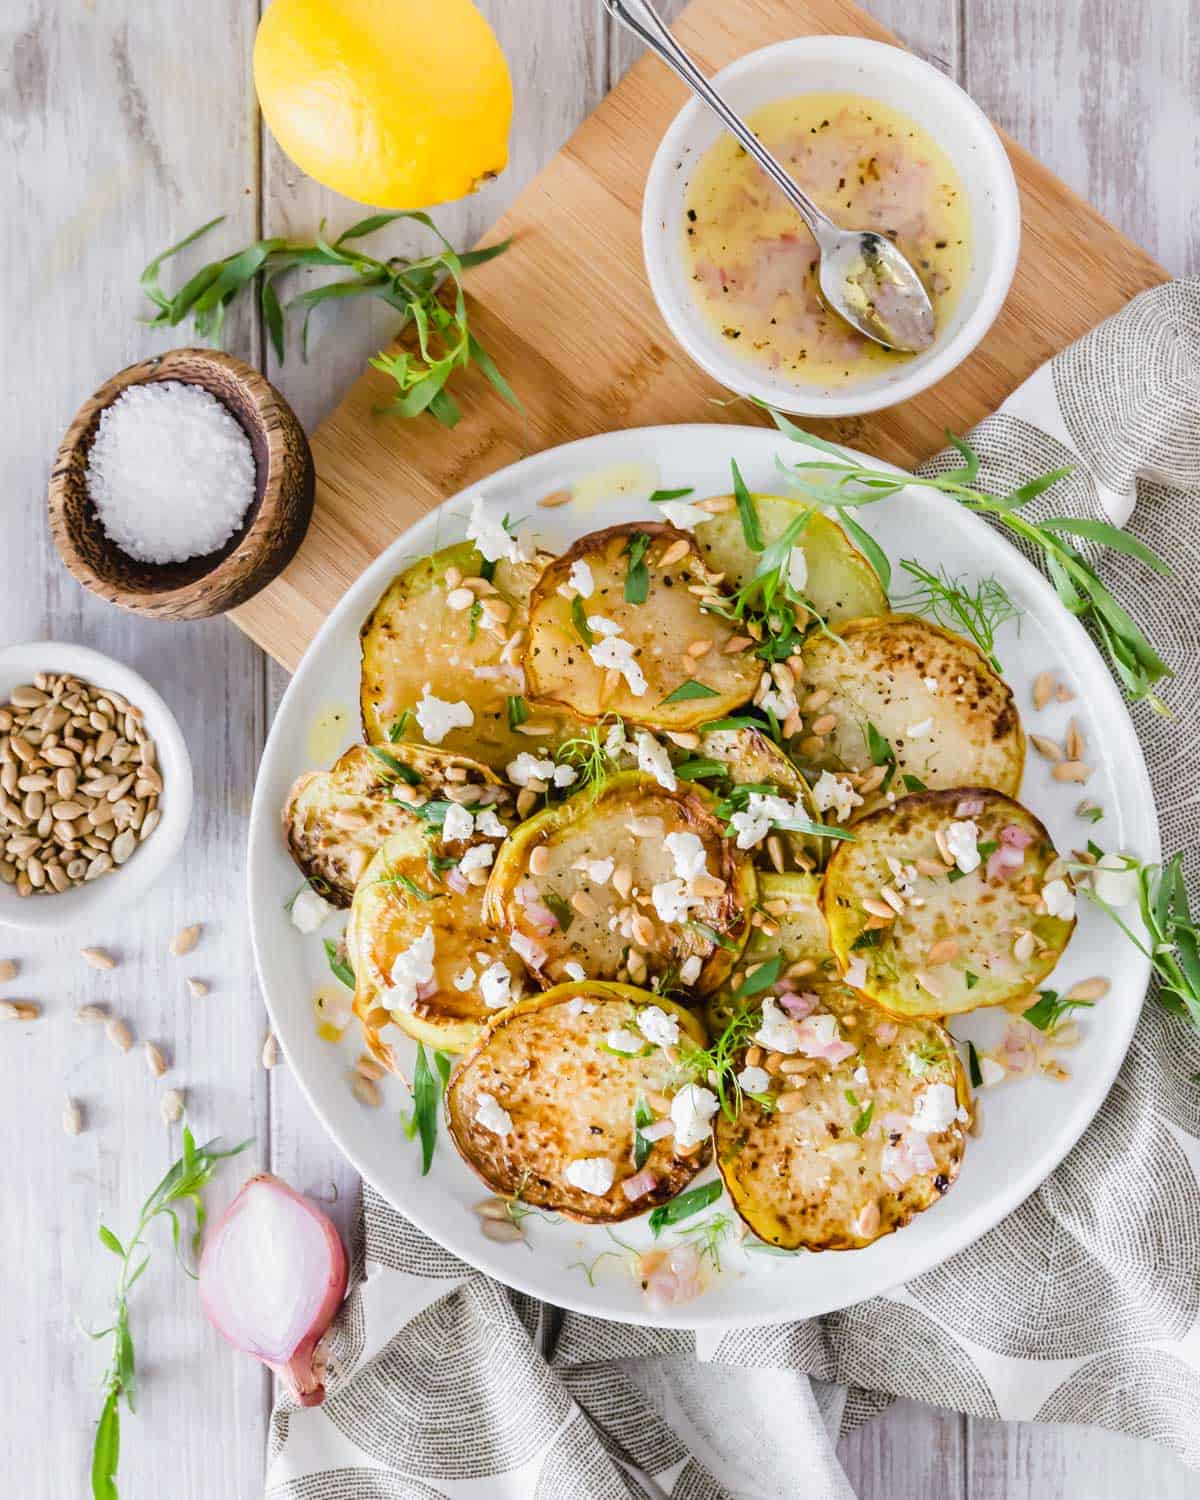 Tender oven roasted kohlrabi is served with a deliciously tangy lemon shallot vinaigrette.